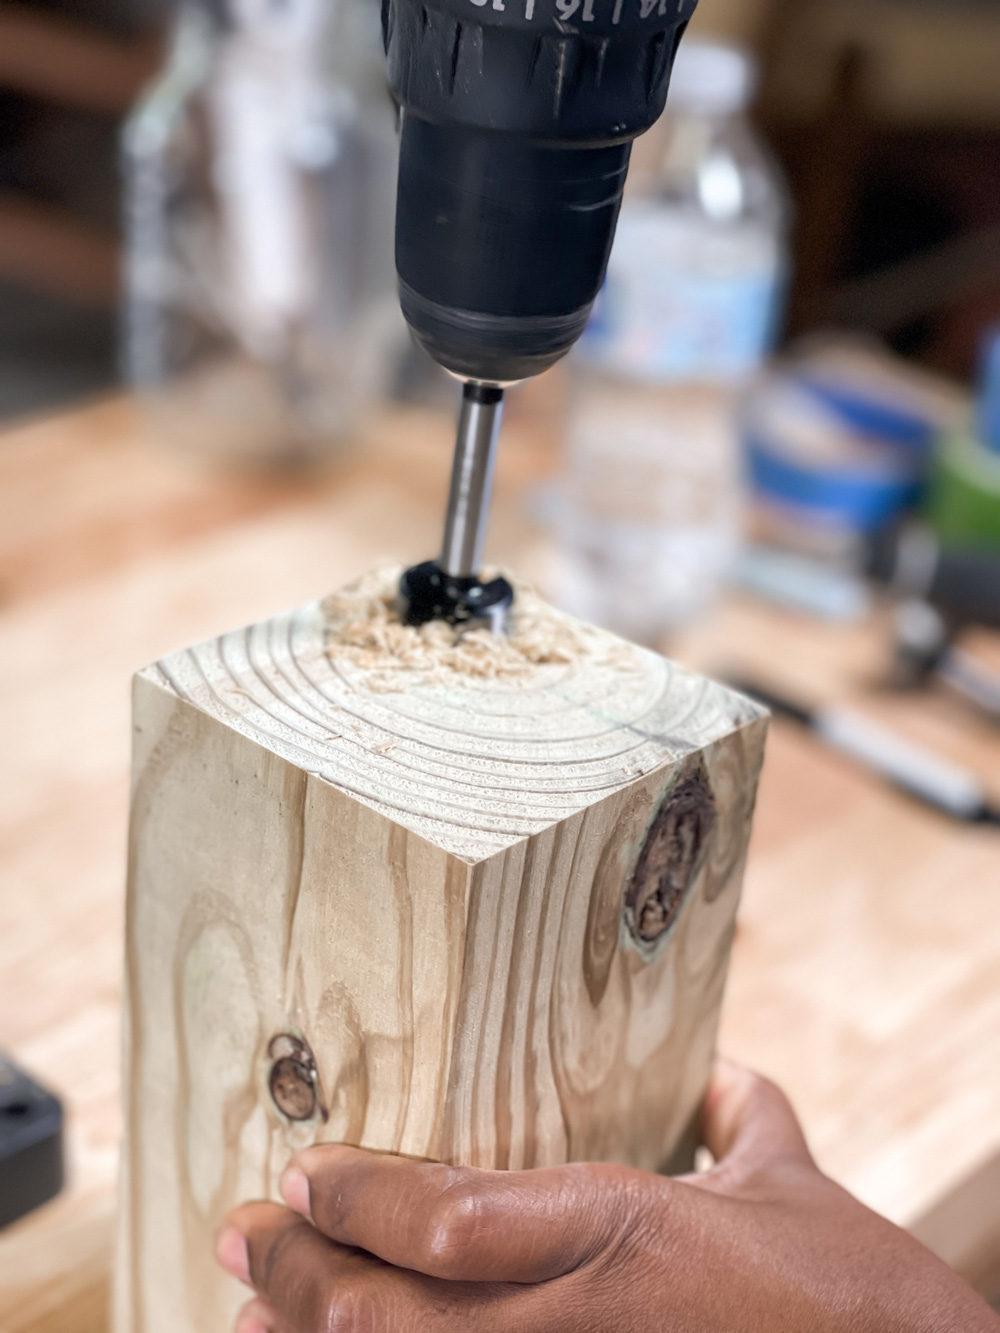 A hand holding a block of wood while a drill is used on the top